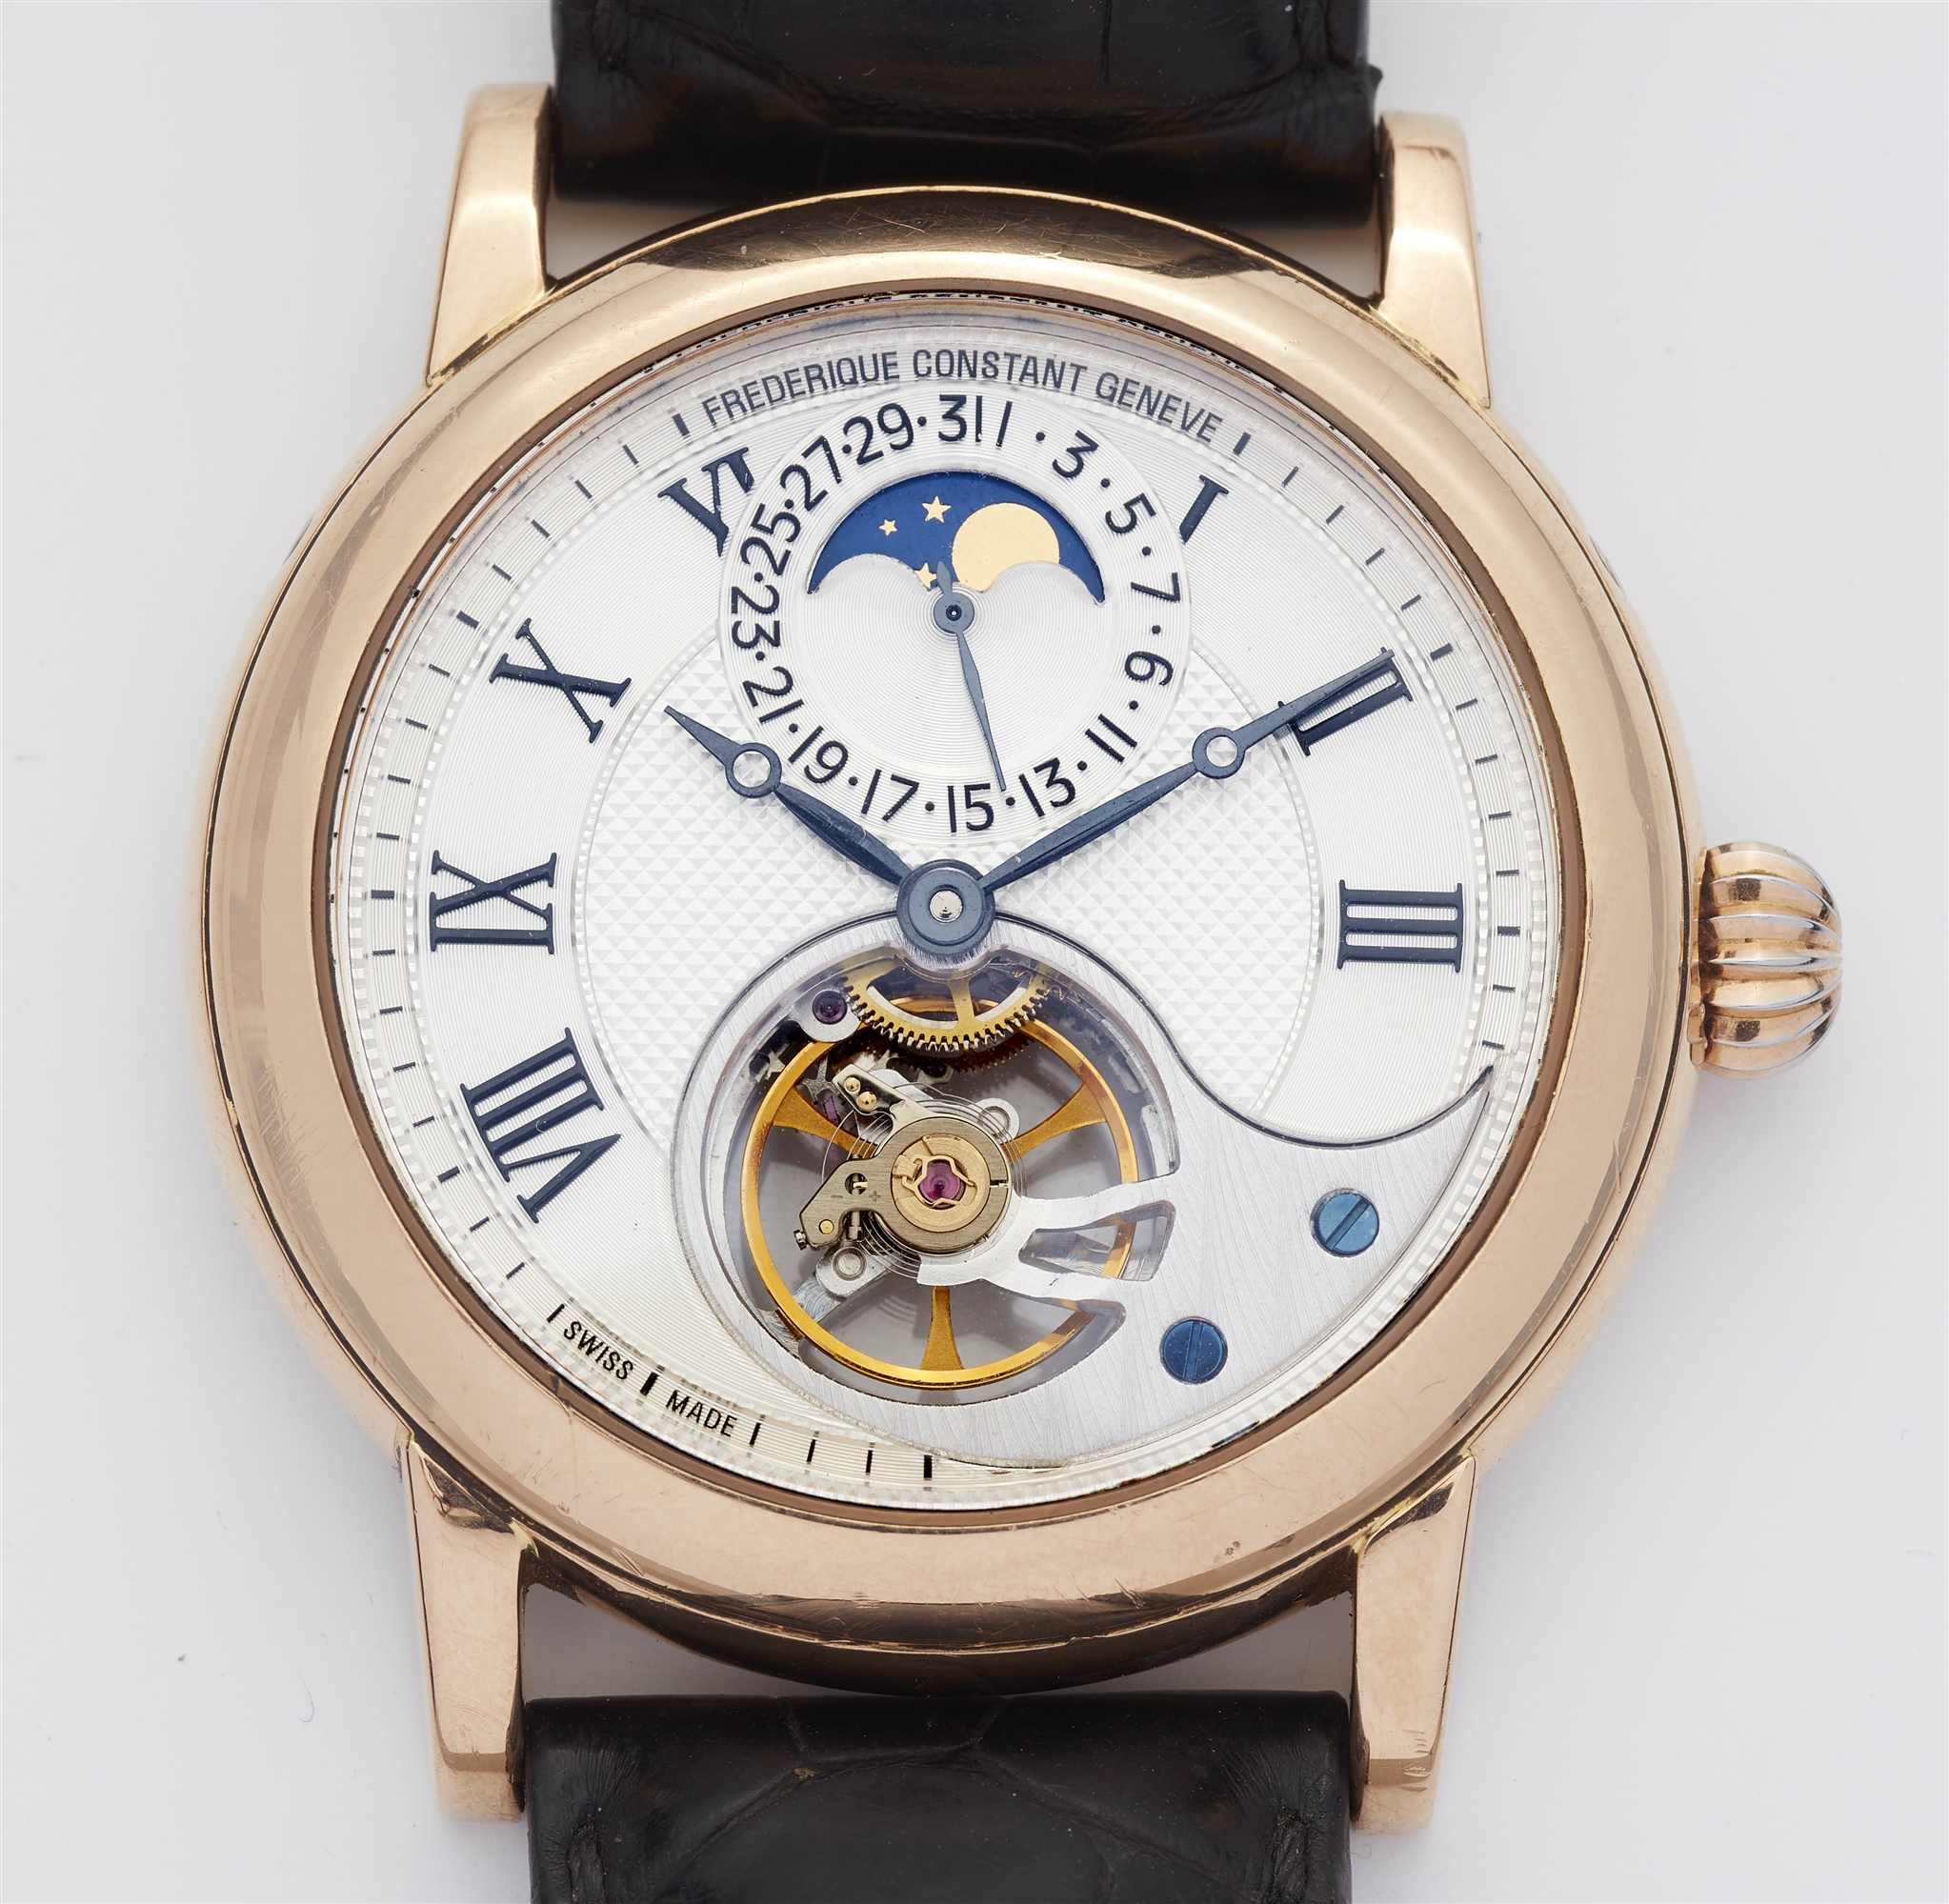 An 18k gold manual winding Frederique Constant Heart Beat Manufacture Limited Edition 059/188 gentle - Image 2 of 4